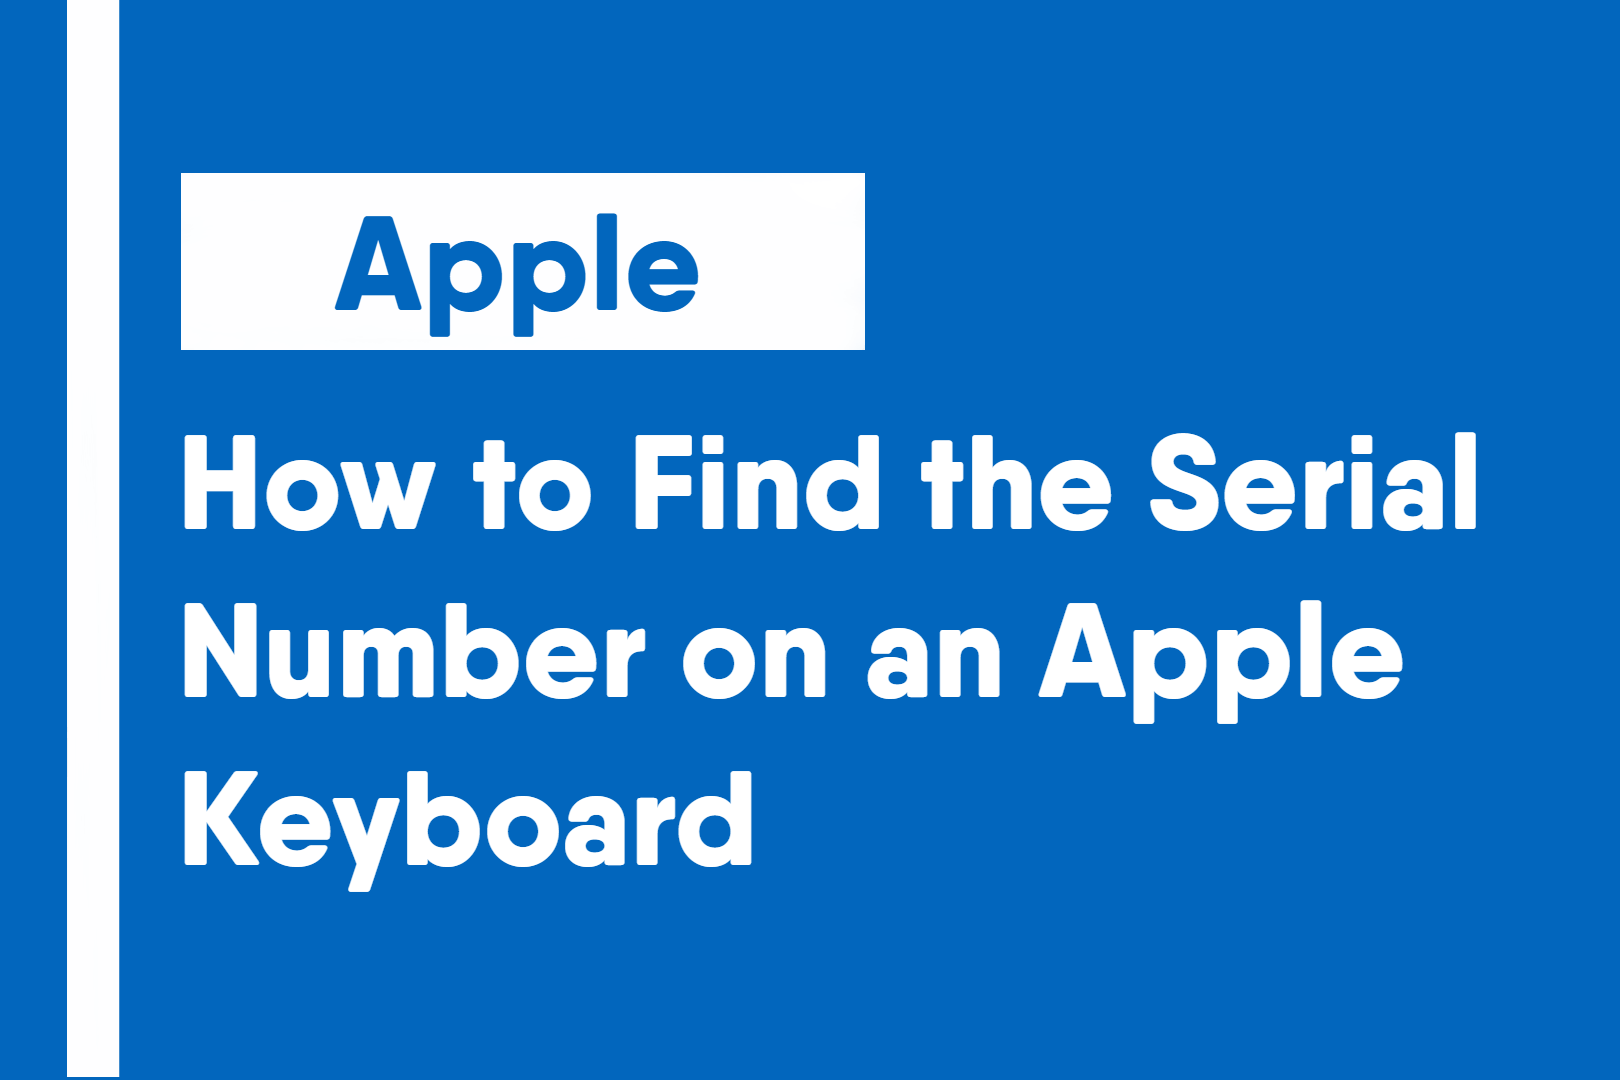 How to Find the Serial Number on an Apple Keyboard